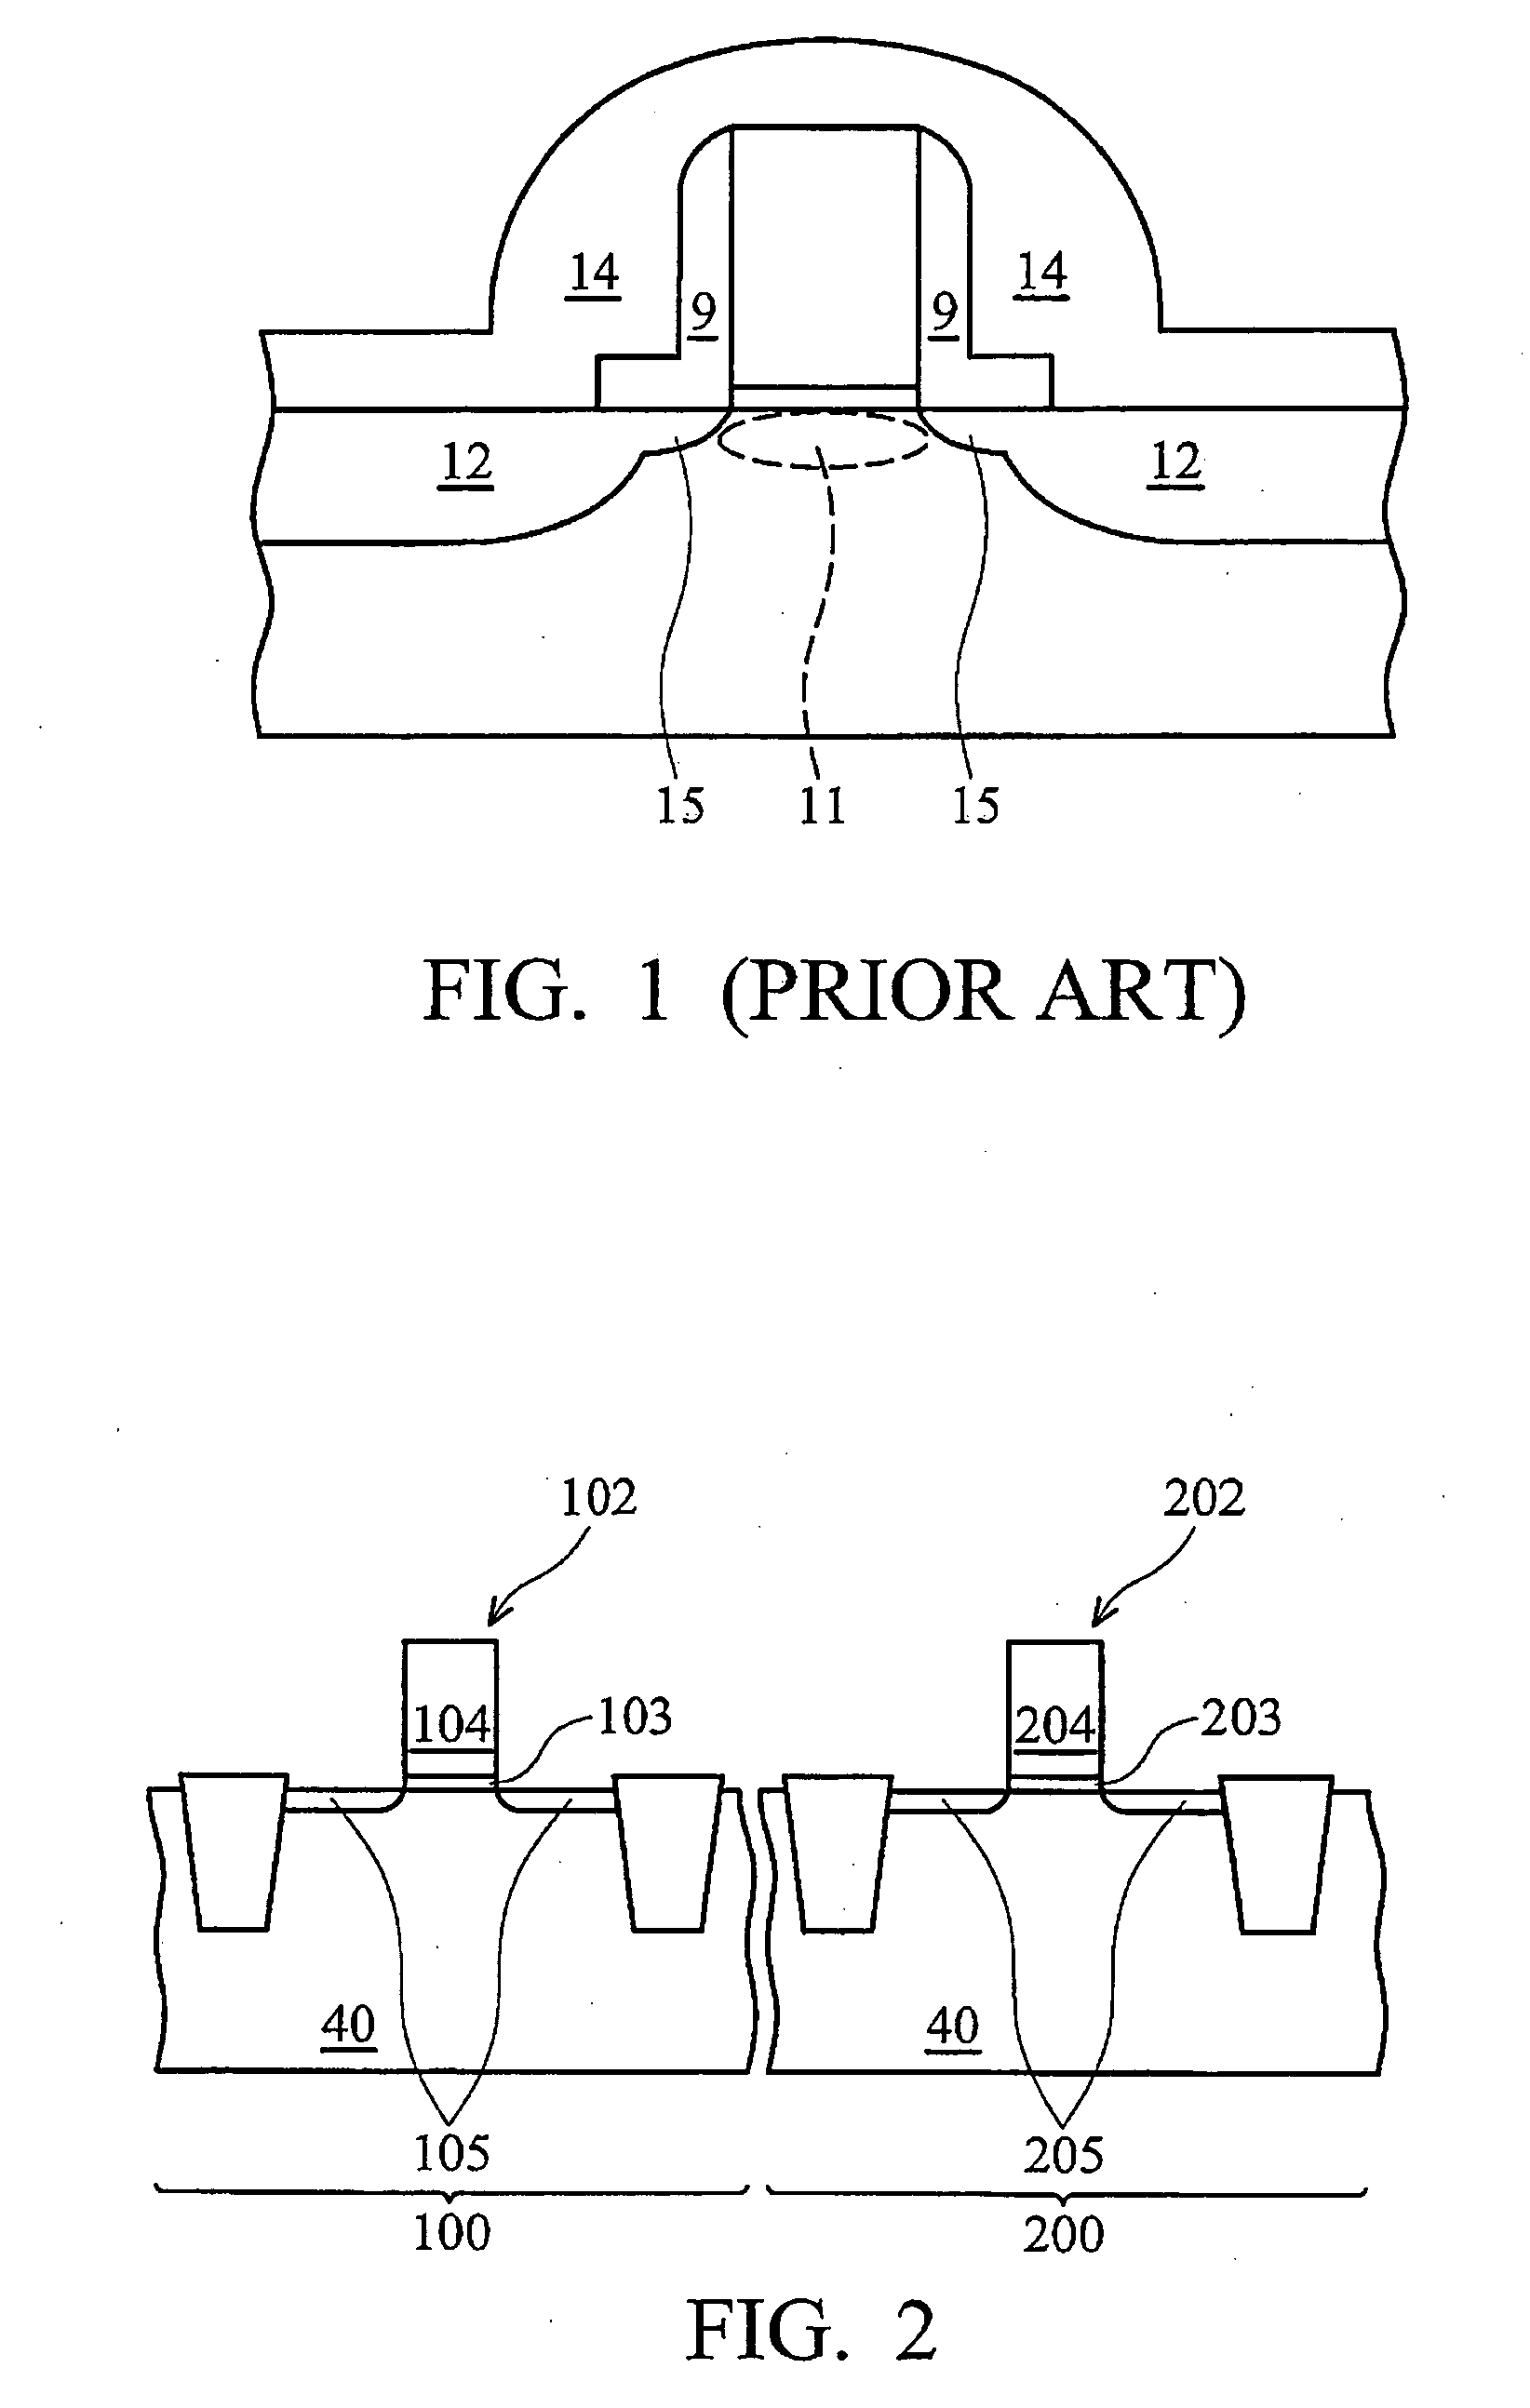 Method of forming a MOS device having a strained channel region